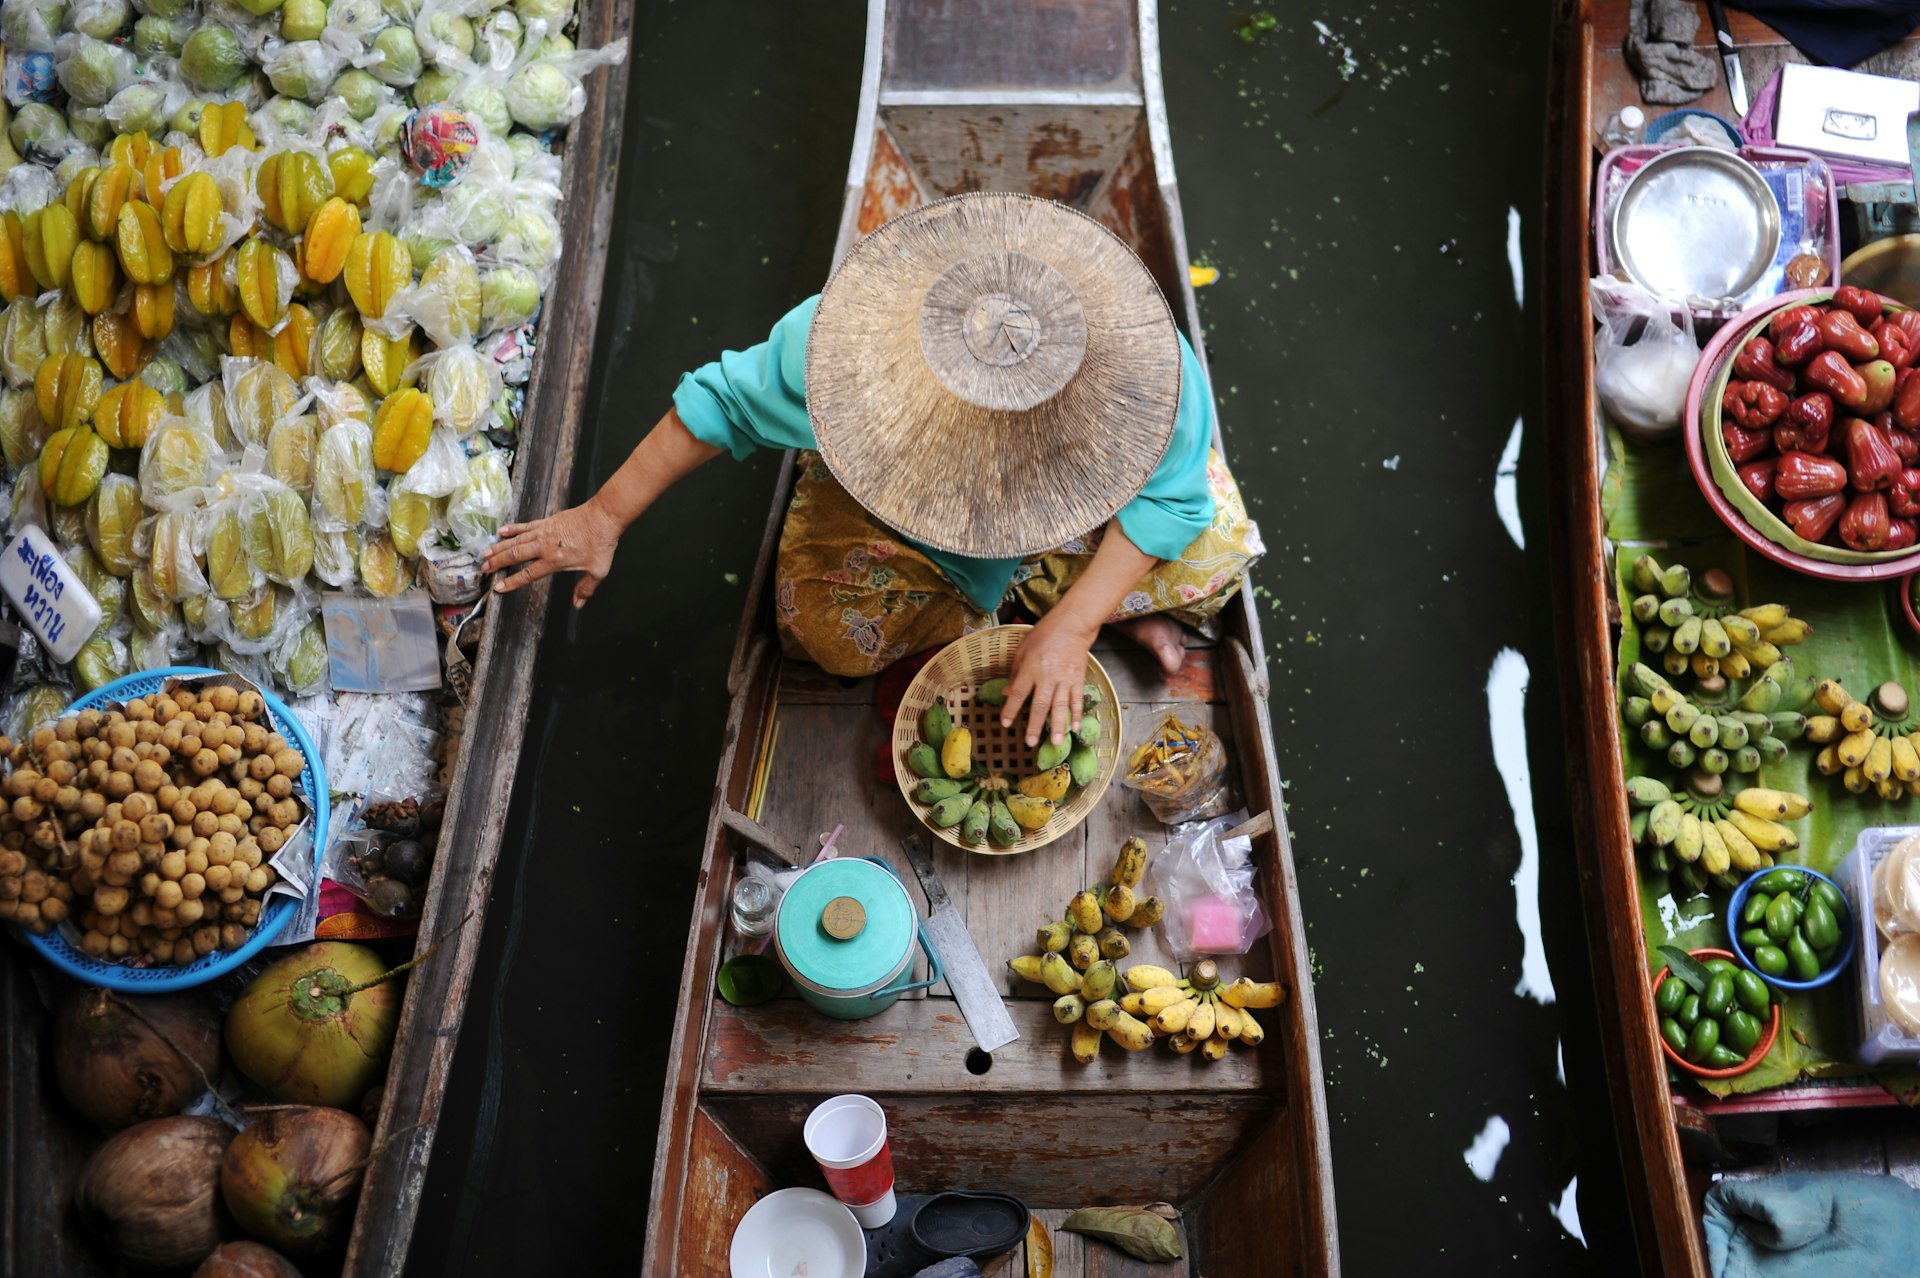 An aerial shot of a Thai woman on a boat looking at rice and other produce at Damnoen Saduak Floating Market in Thailand